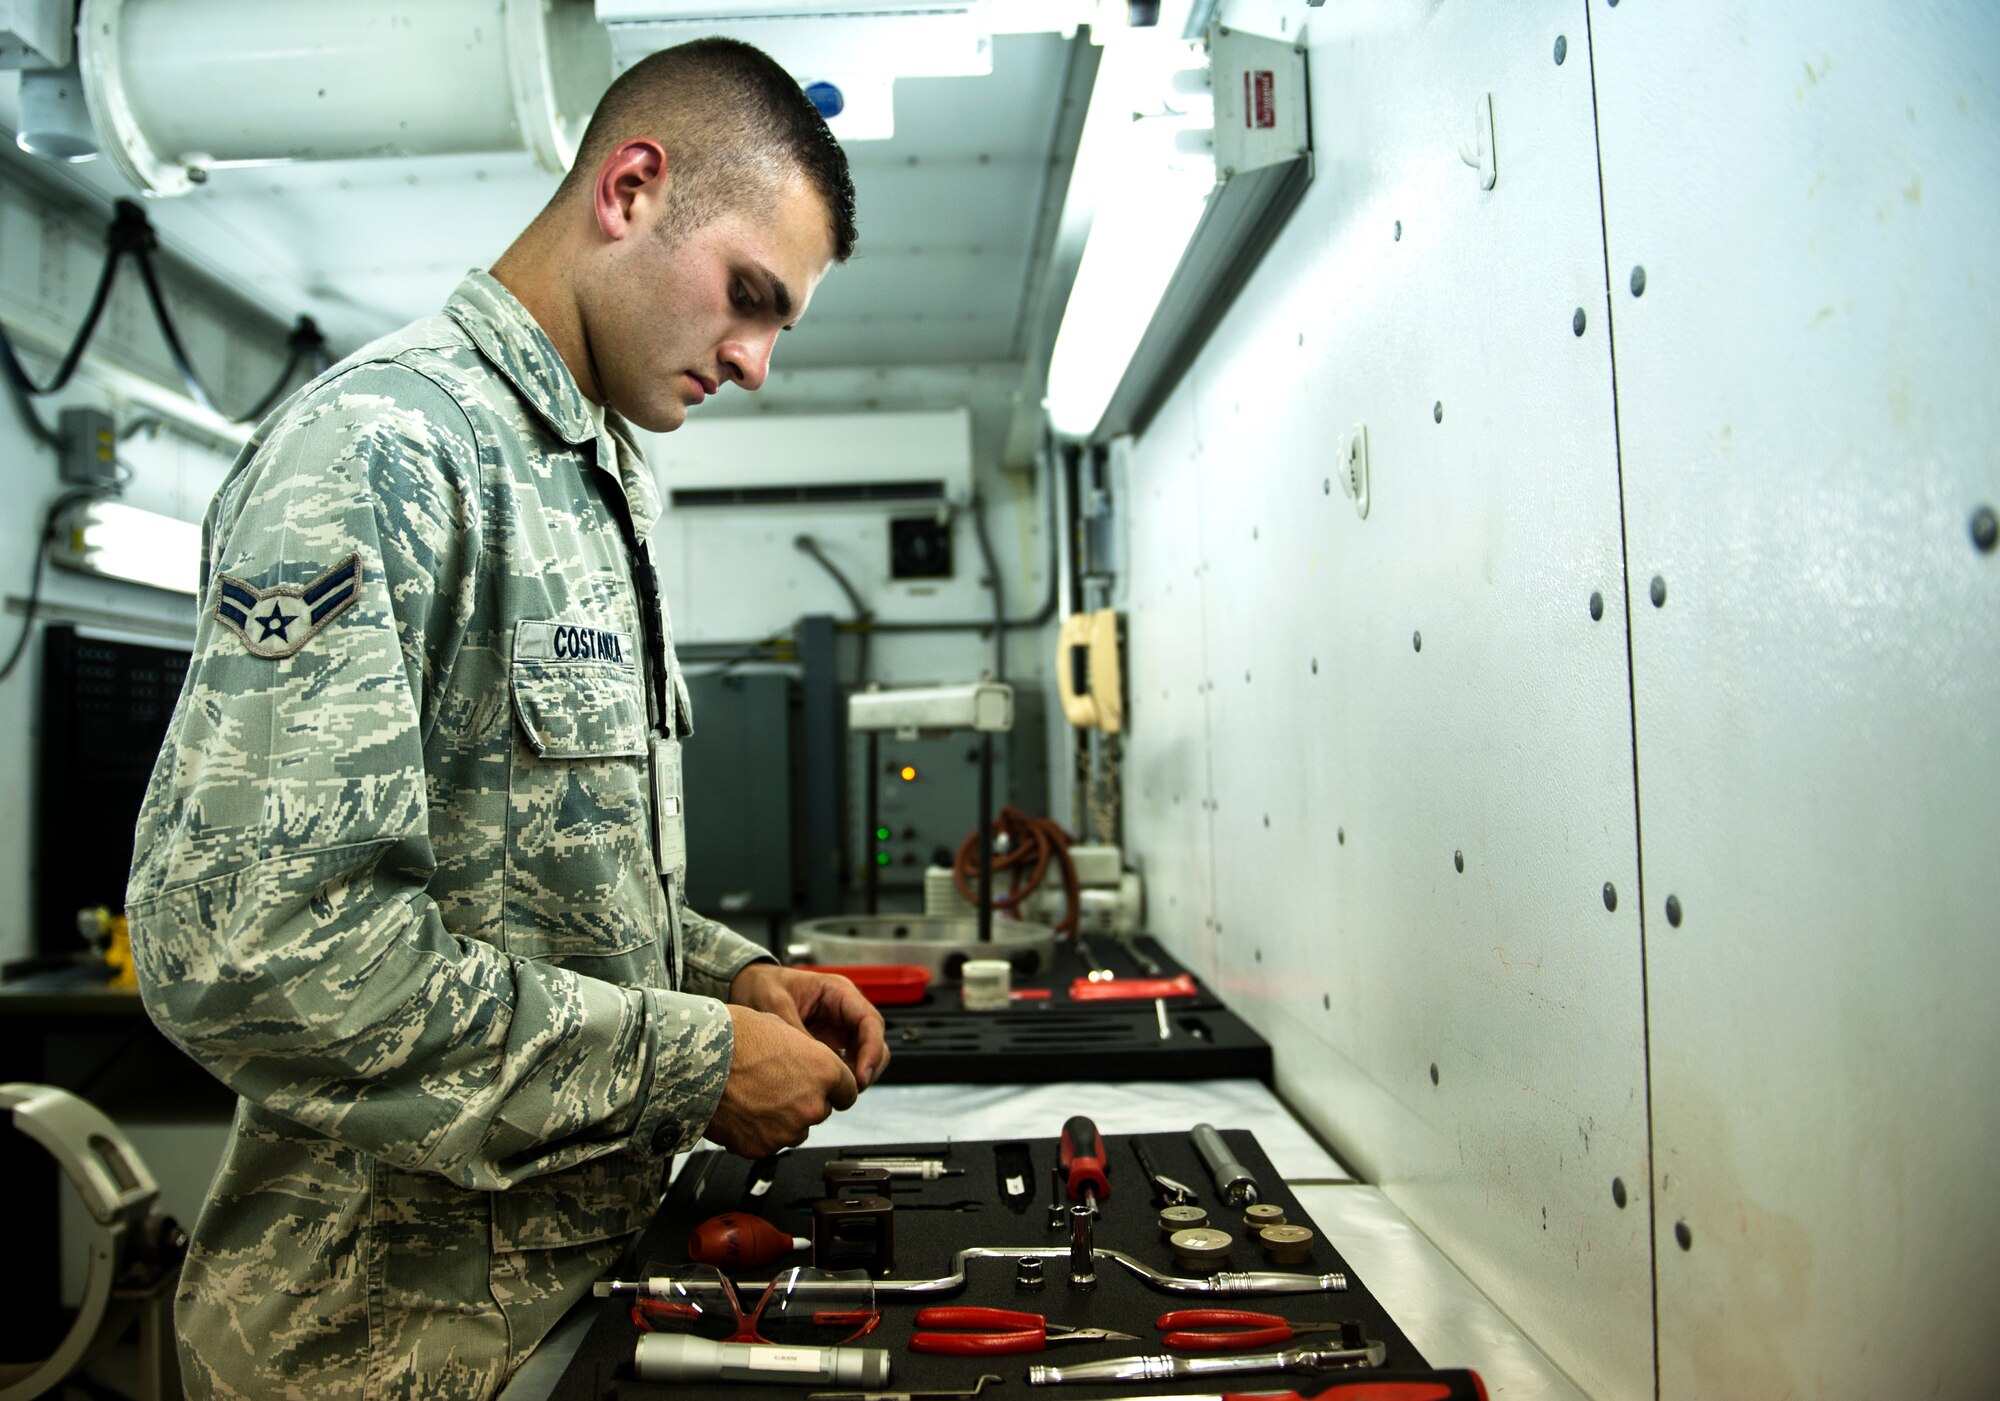 Airman 1st Class Giovanni Costanza, 39th Maintenance Squadron technician, organizes tools for work Aug. 2, 2013, at Incirlik Air Base, Turkey. With the wide array of tools Costanza uses, it can take up to two and a half hours of preparation time prior to performing maintenance. (U.S. Air Force photo by Senior Airman Daniel Phelps/Released)